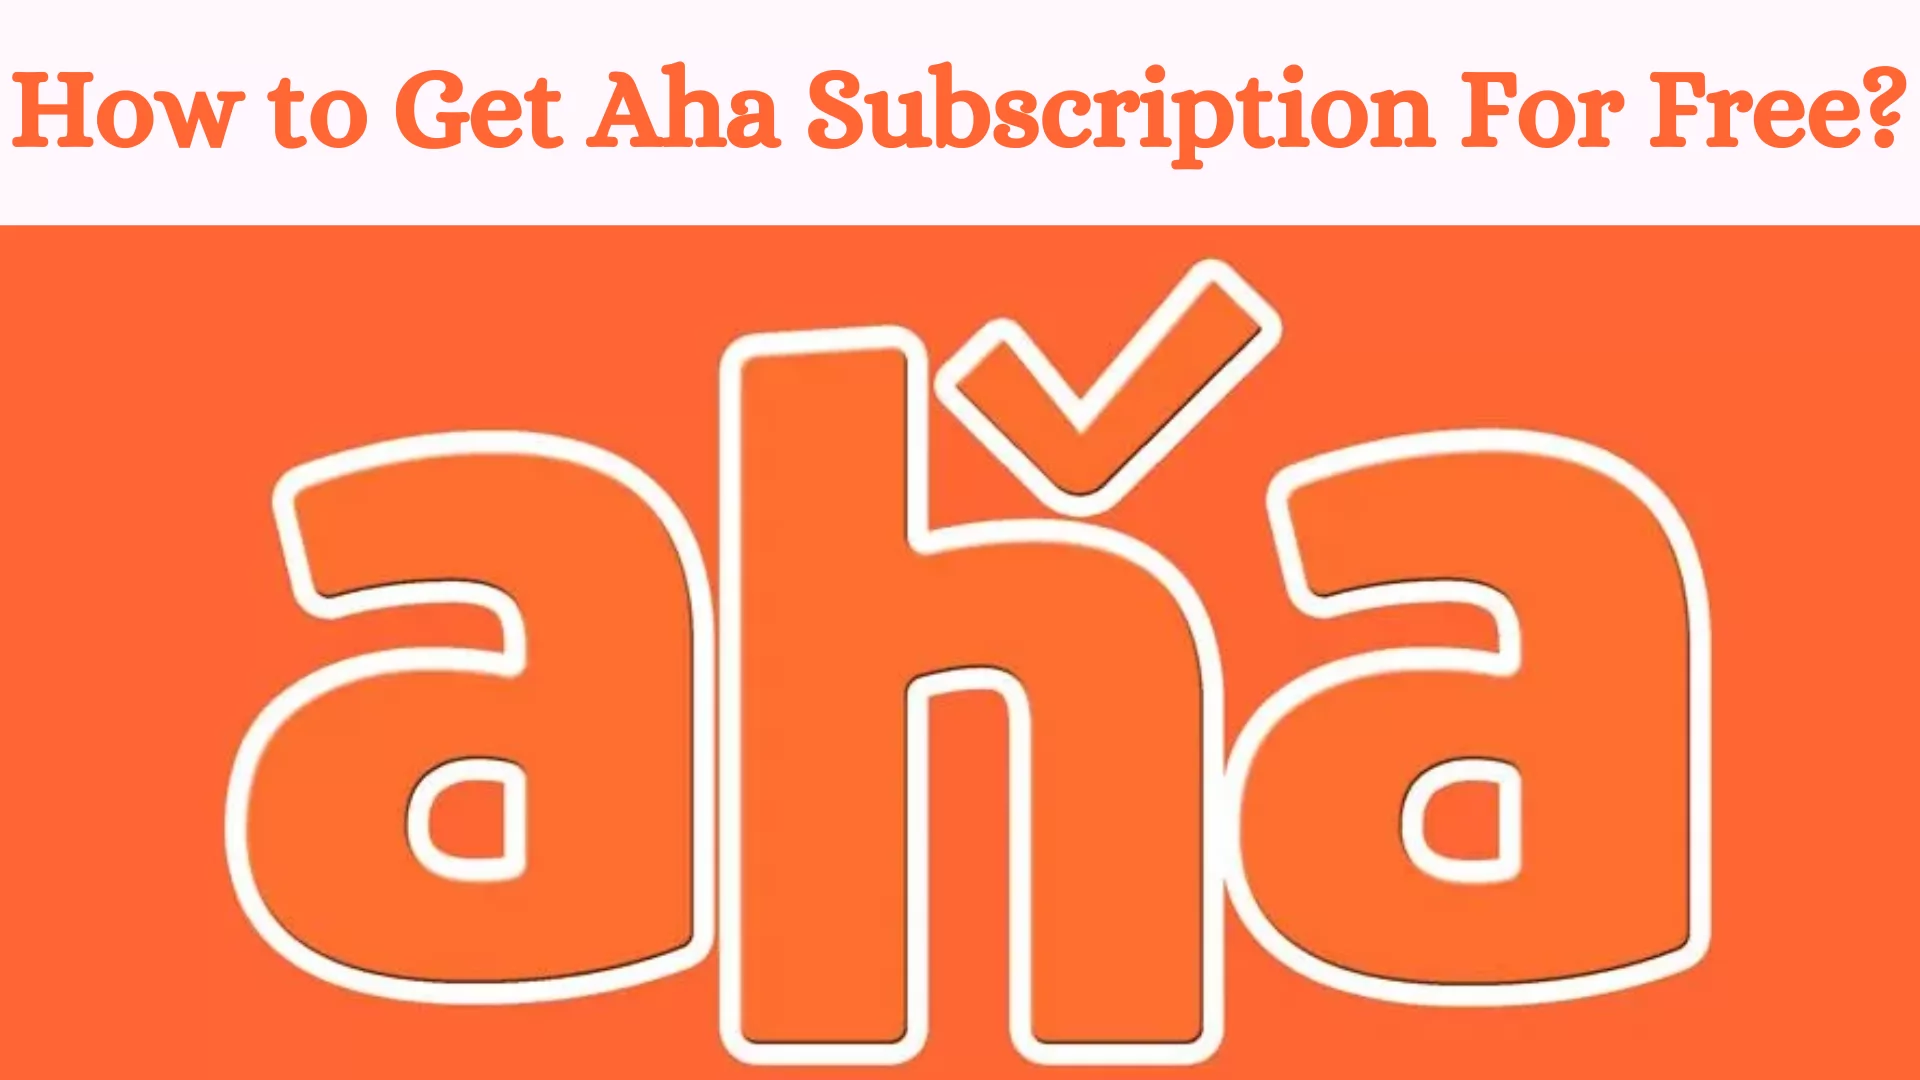 How to Get Aha Subscription For Free?